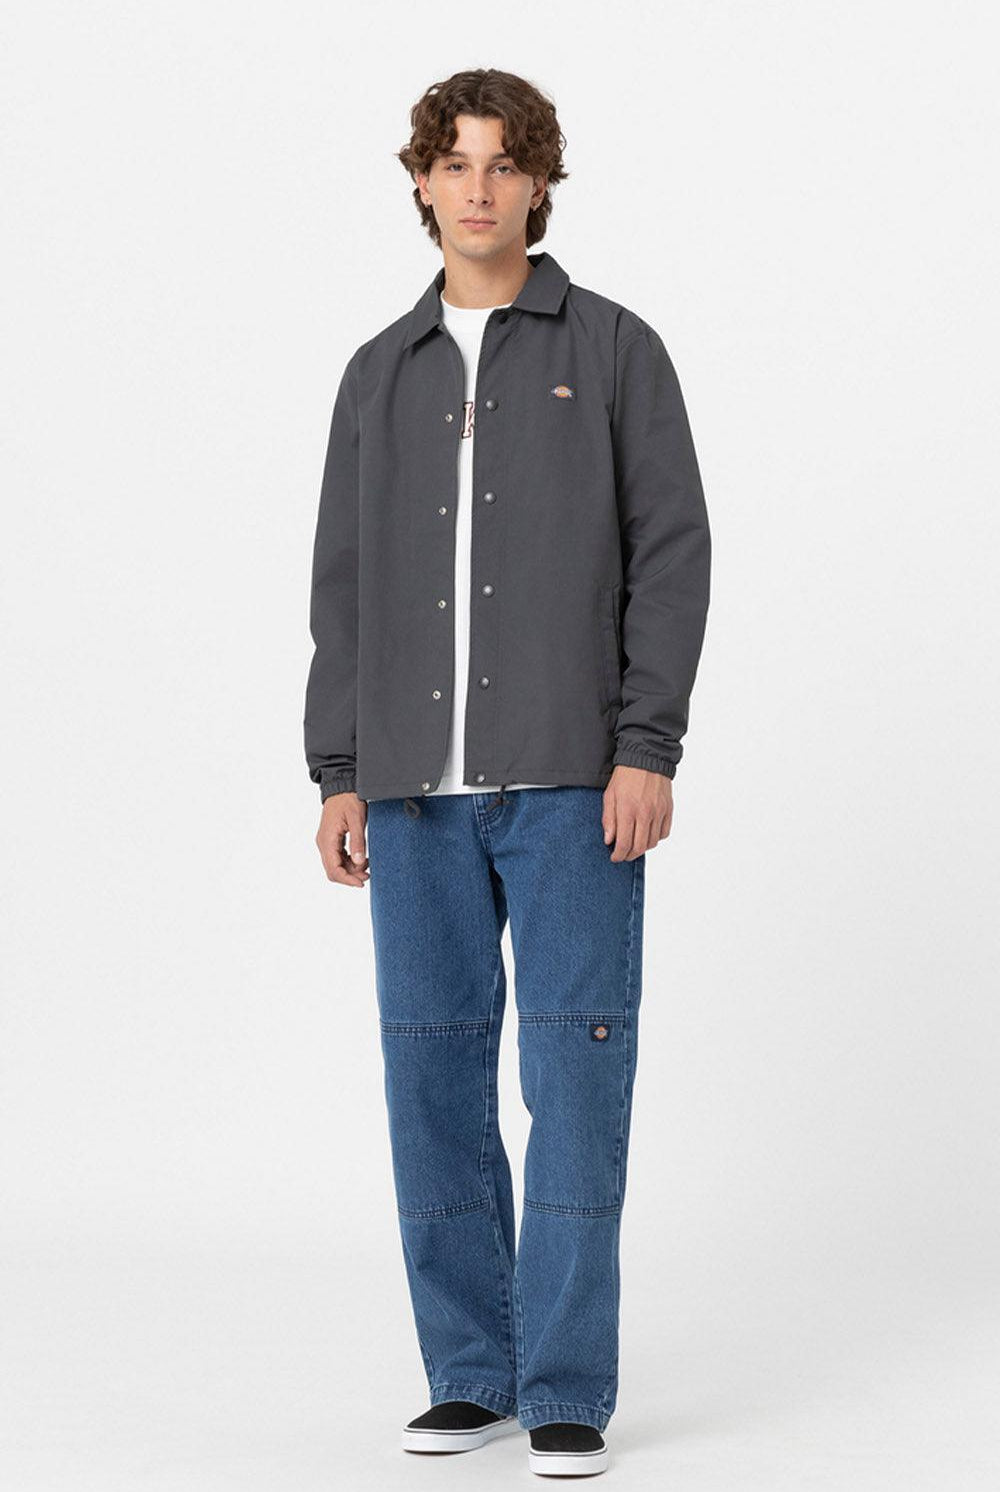 Dickies | Oakport Coach Charcoal Grey 2 | Milagron